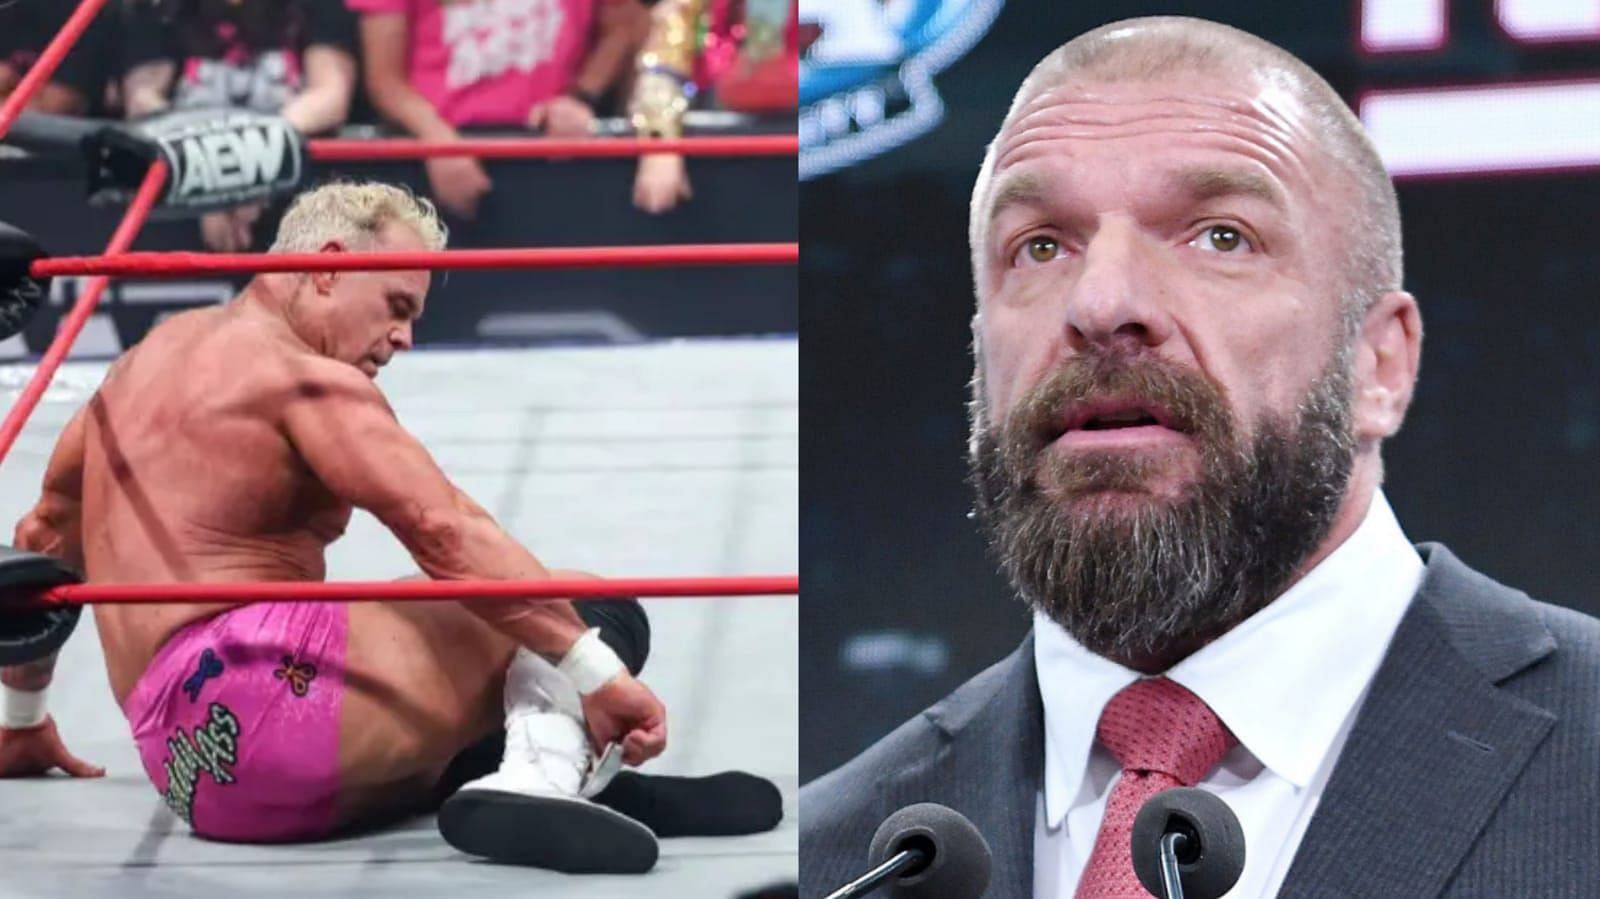 Billy Gunn left his boots in the middle of the ring in the latest episode of AEW Collision